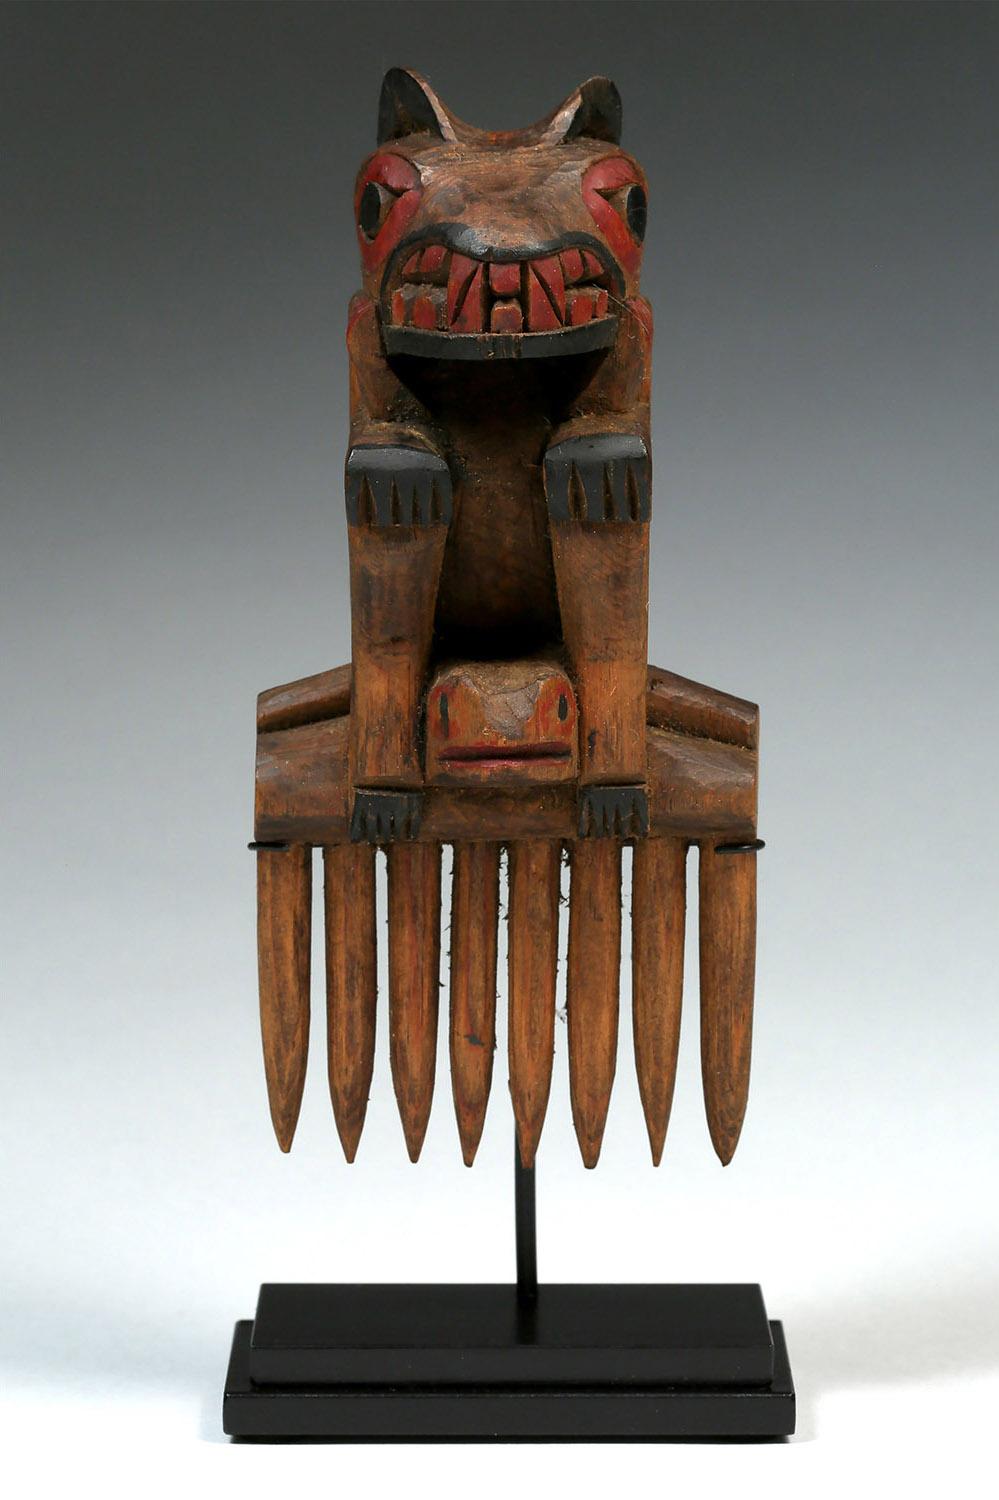 Early 20th Century Native American Northwest Coast Bear Comb, Probably Tlingit

The comb depicts a bear seated on a frog. The bared teeth are stylistically carved, with classic eye treatment and its features accentuated in traditional red and black